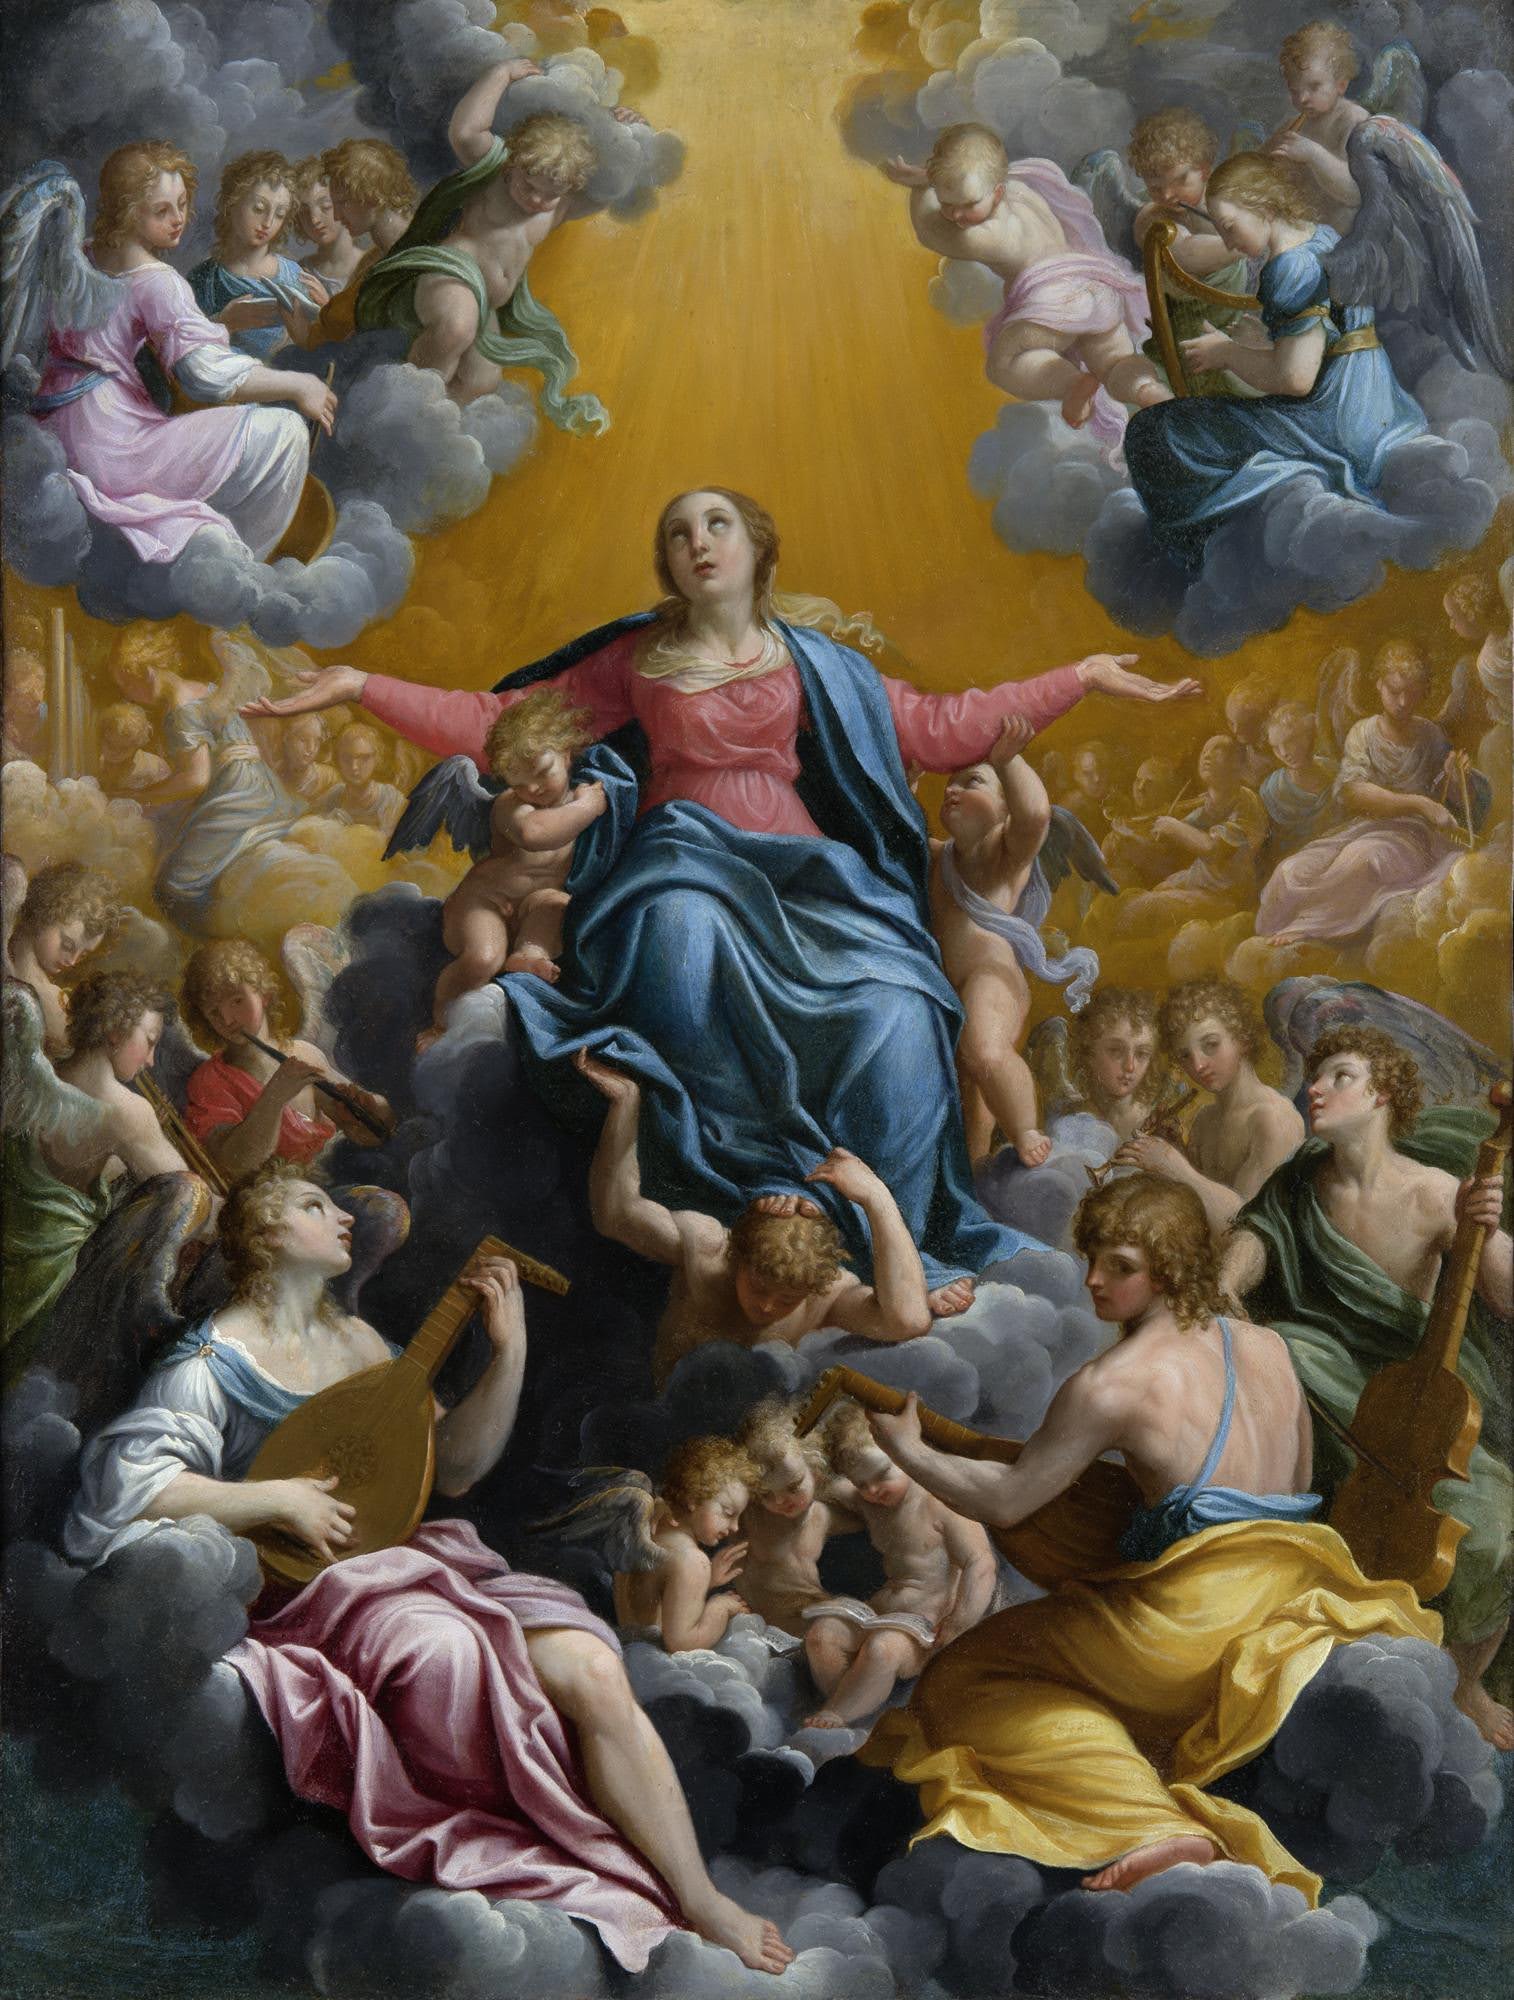 Pictures for the feast of the Assumption of Mary (15